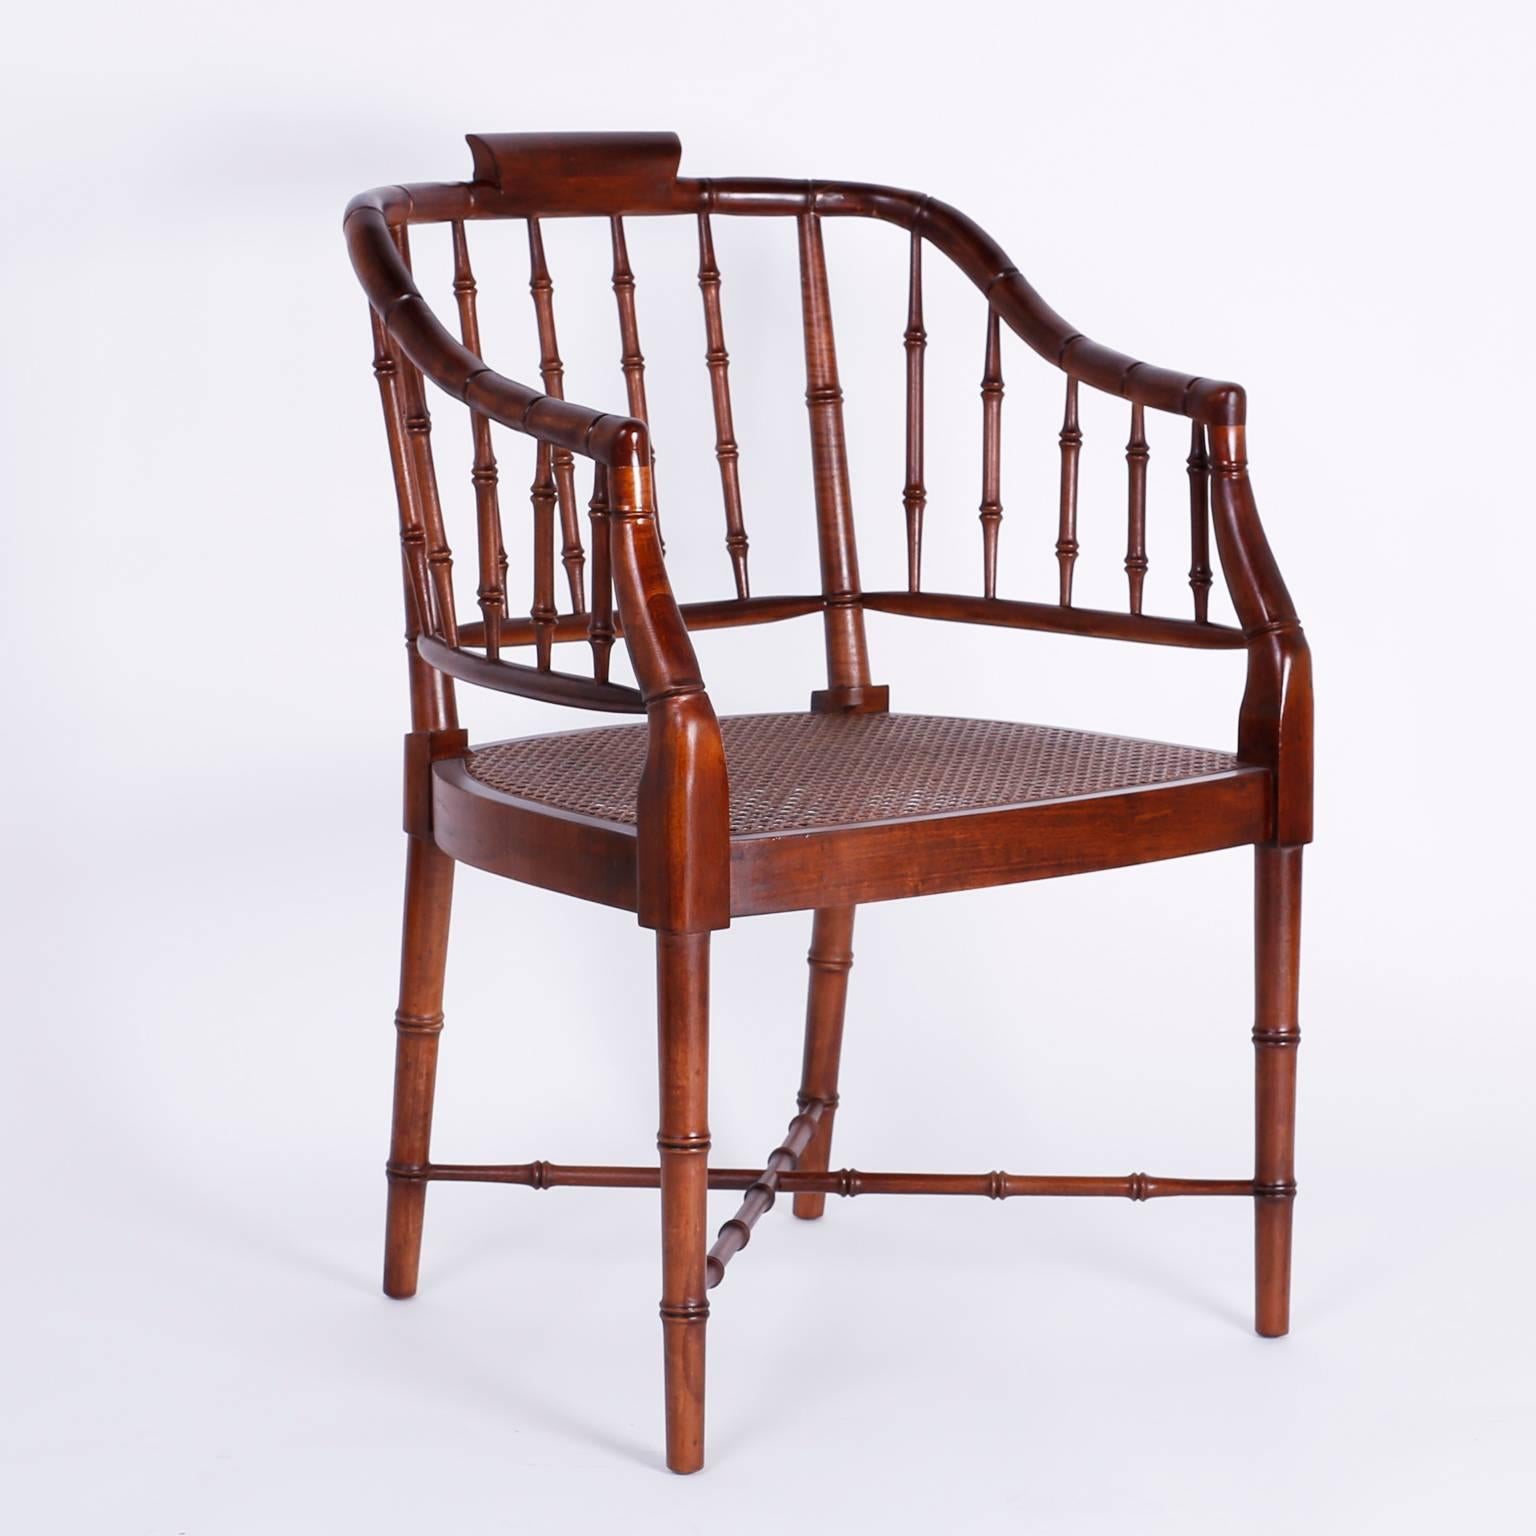 Crafted in the Mid-Century with a native hardwood, possibly spruce, these elegant chairs borrow influences from several different style sources including tavern, windsor, and British colonial. Featuring lathe turned balustrades, legs and stretchers.